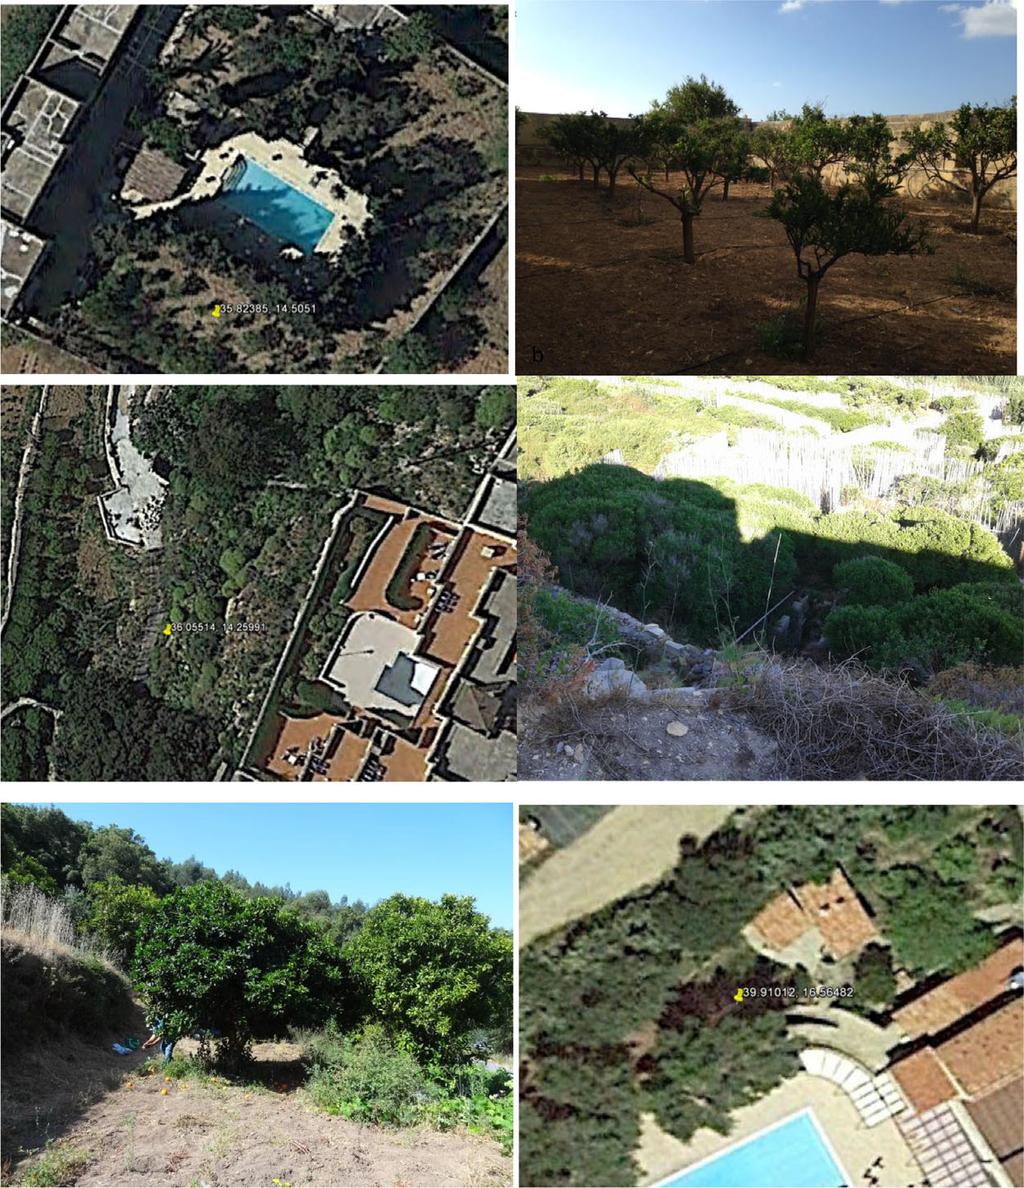 a b c d e f Figure 2: Photos of backyards and smallholdings from sites corresponding to the geographical coordinates indicated in Guarnaccia et al. (2017) for their findings of P. citricarpa.